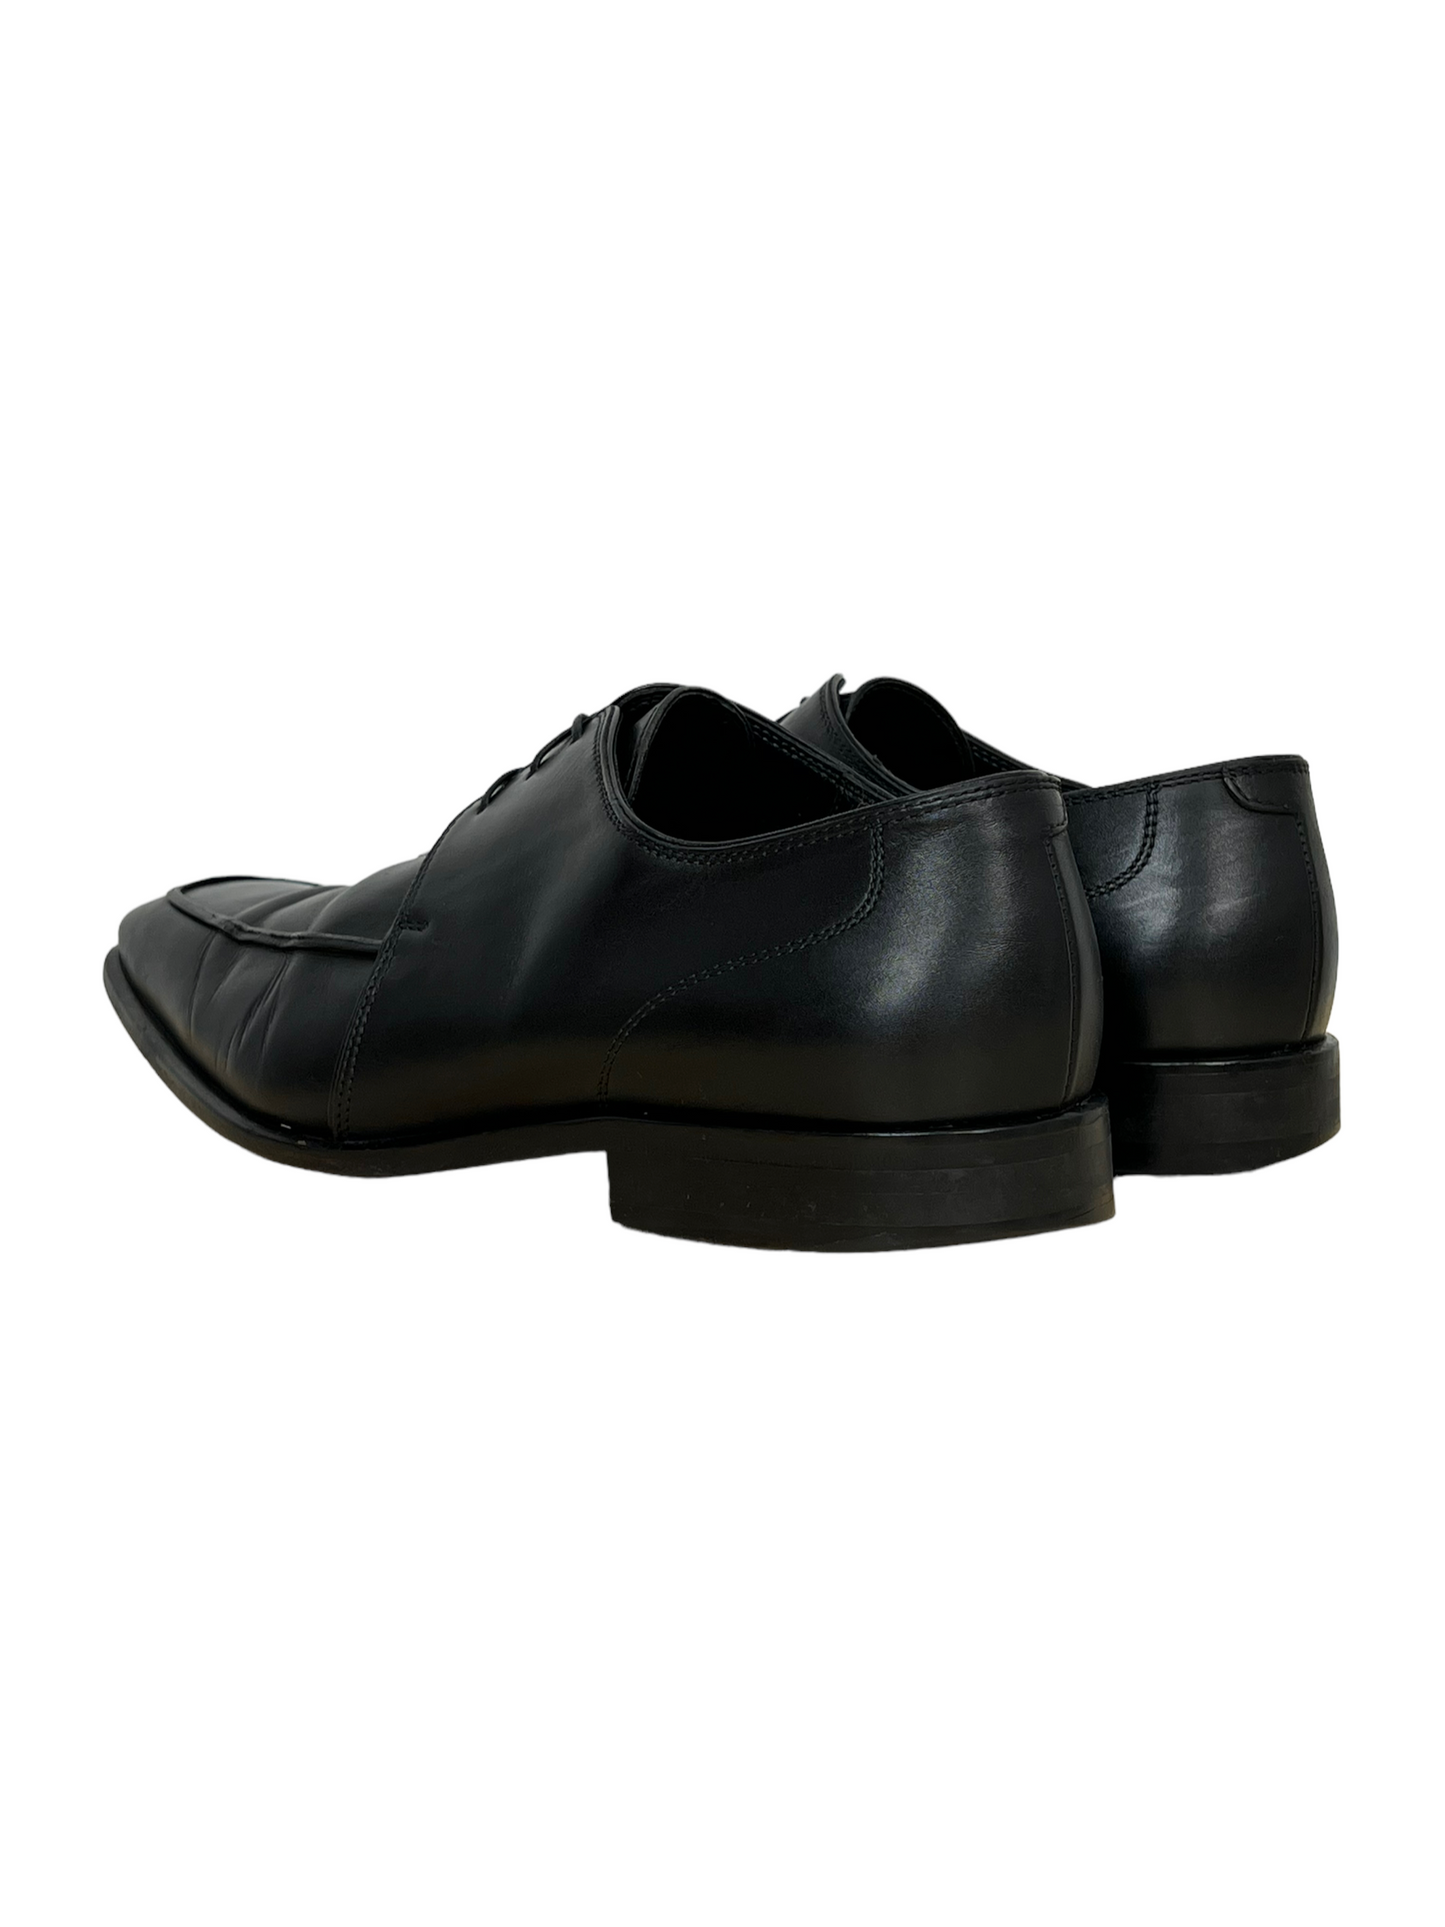 Hugo Boss Black Leather Derby Dress Shoe - Genuine Design Luxury Consignment for Men. New & Pre-Owned Clothing, Shoes, & Accessories. Calgary, Canada